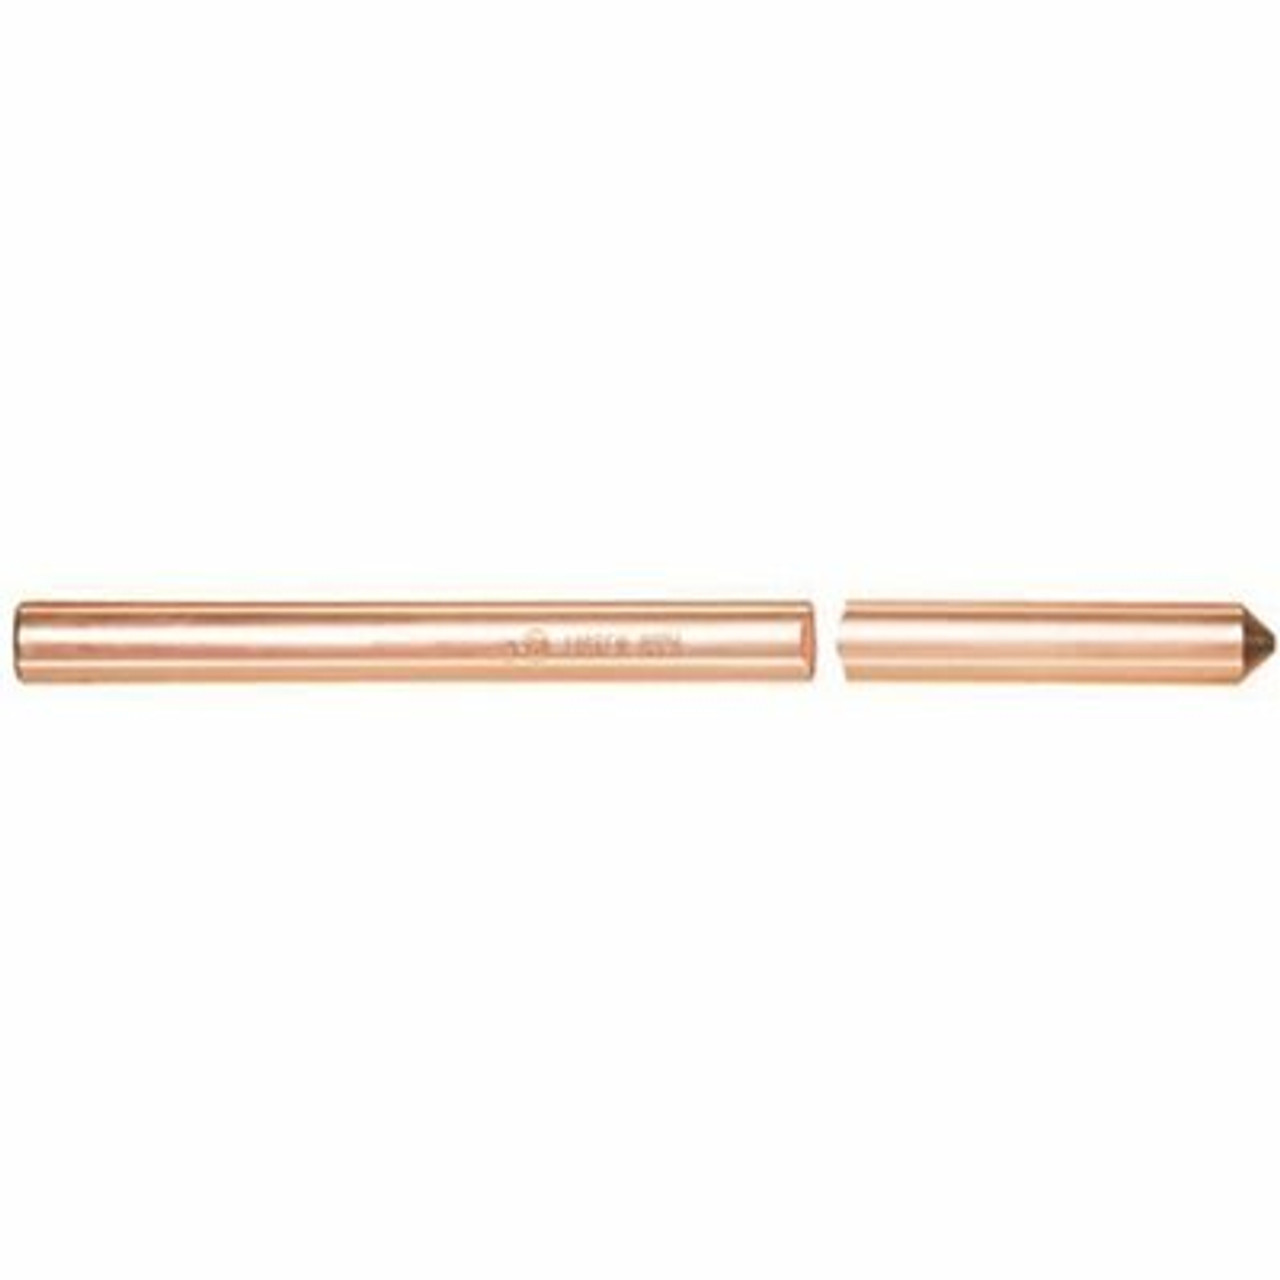 South Atlantic Llc 5/8 In. X 8 Ft. Copperclad Ground Rod (5 Rod Per Pack)